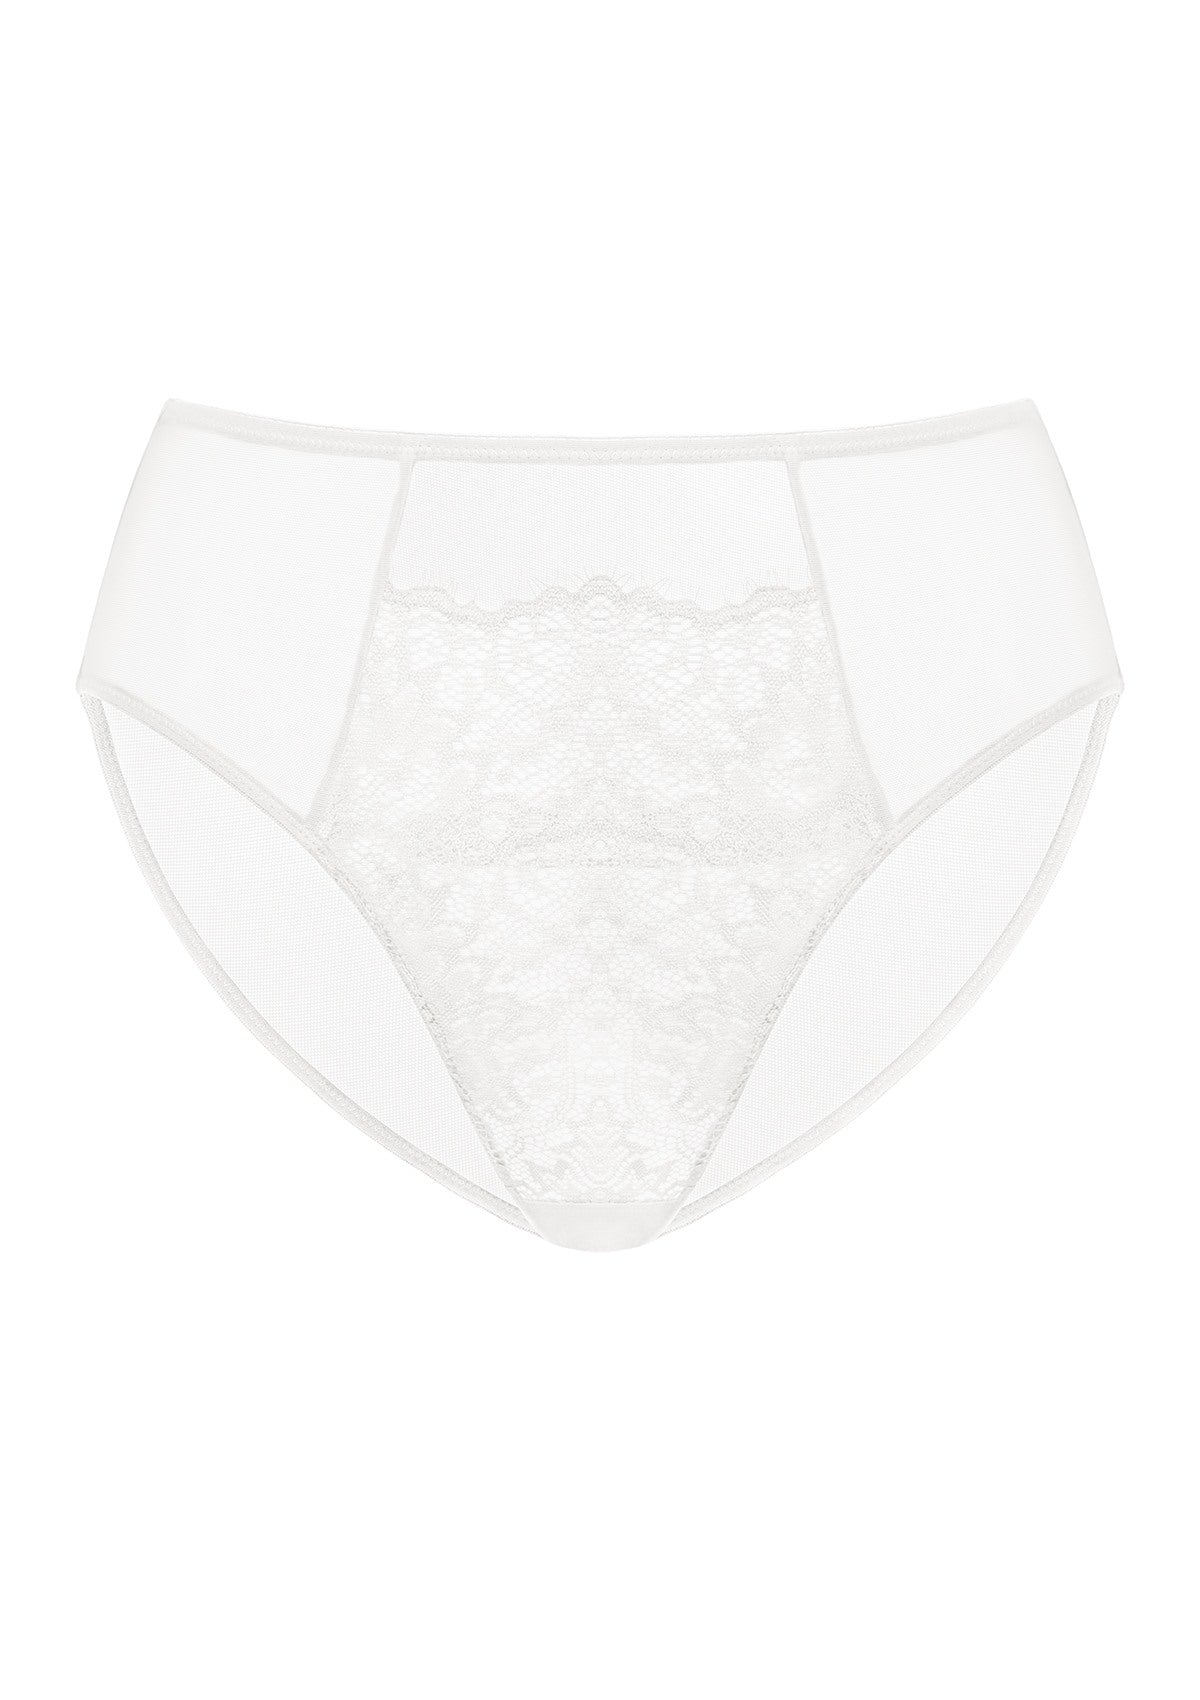 HSIA Spring Romance High-Rise Floral Lacy Panty-Comfort In Style - M / White